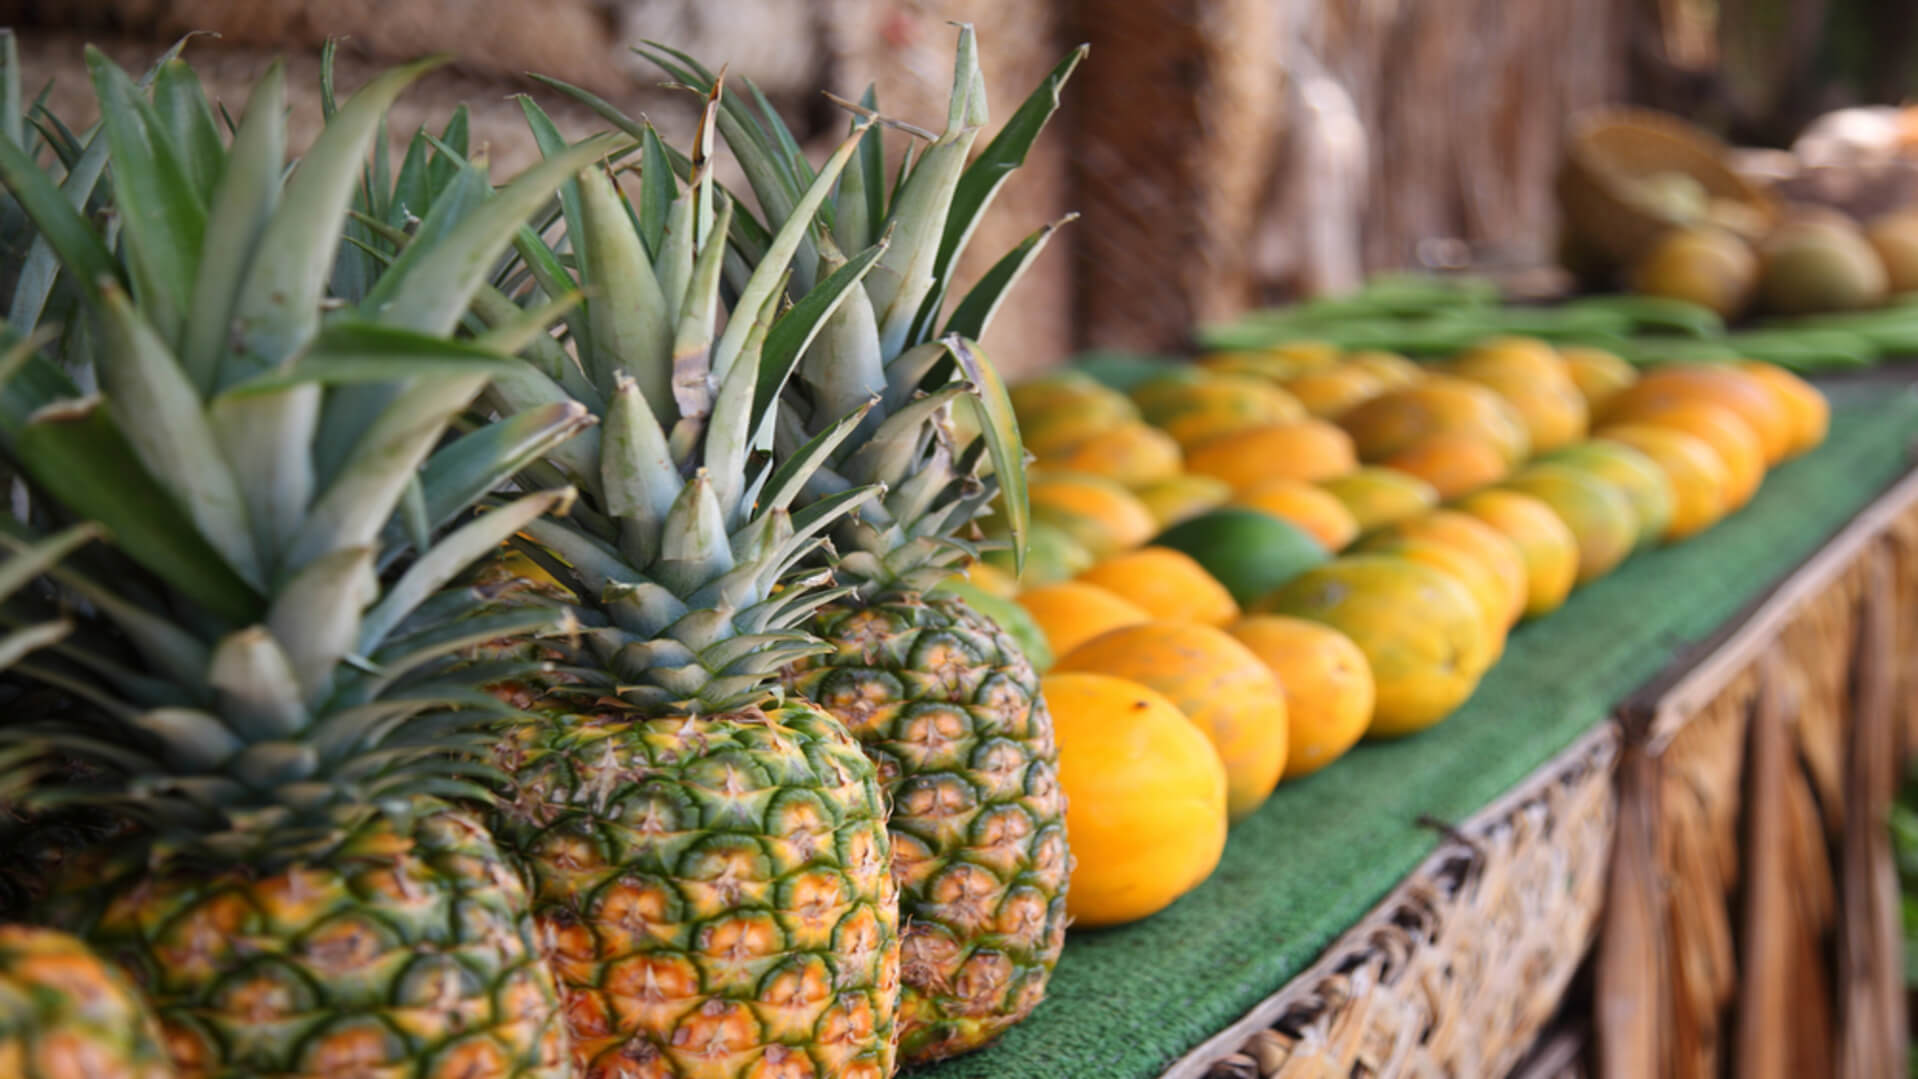 Pineapple and other fruit for sale at one of Maui's farmers markets